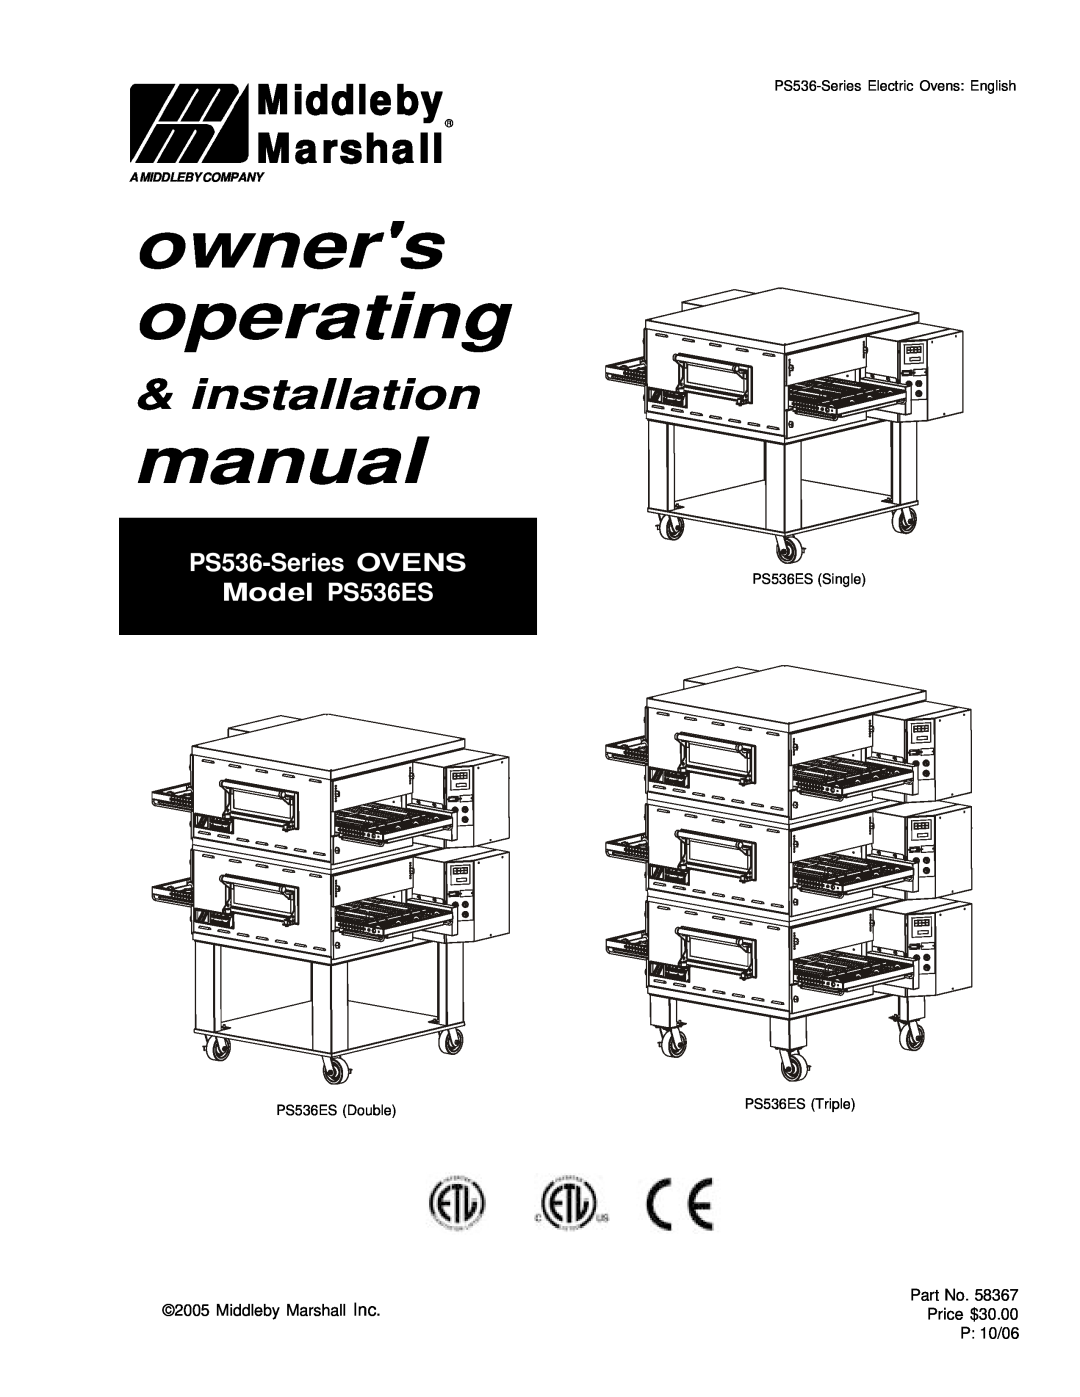 Middleby Marshall installation manual owners operating, Middleby, Marshall, PS536-Series OVENS Model PS536ES 